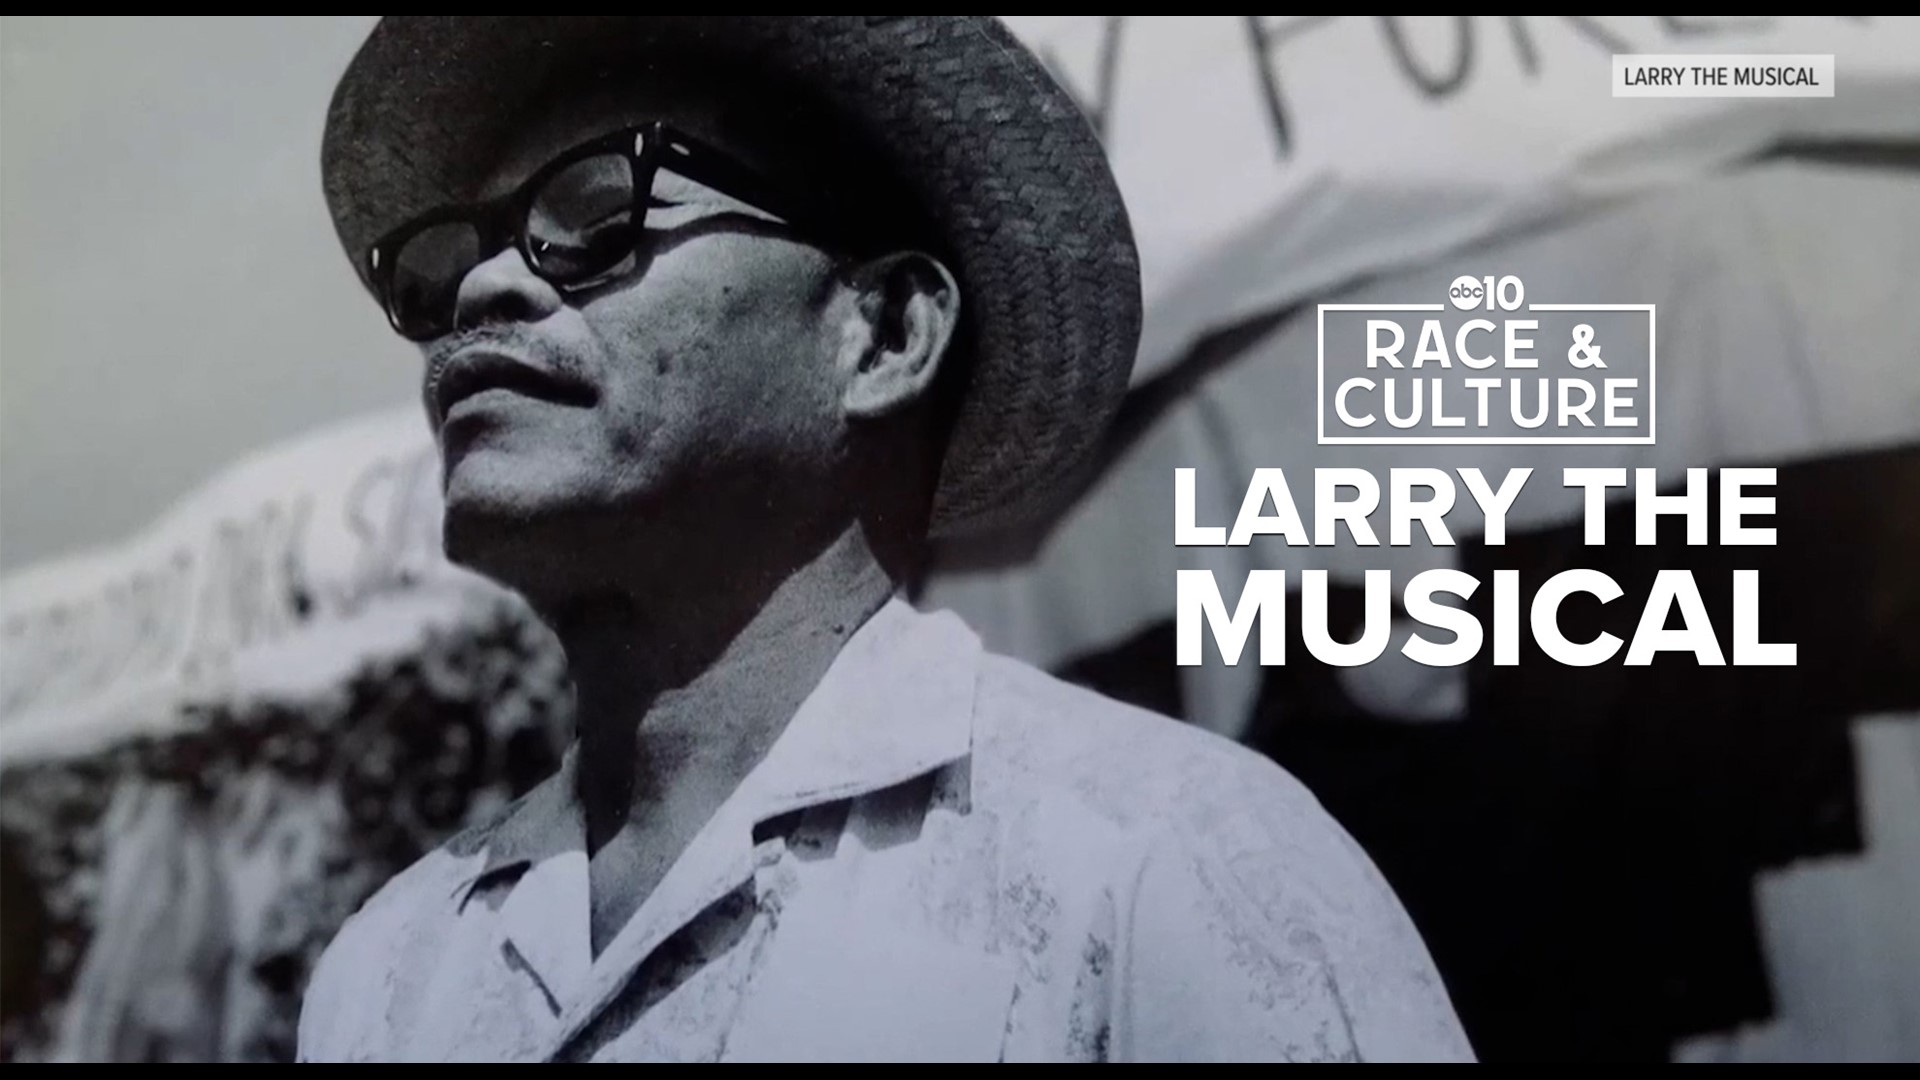 Larry Itliong was a Filipino American labor organizer and civil rights activist. He played a main role in the Delano Grape Strike and the founding of the UFW union.